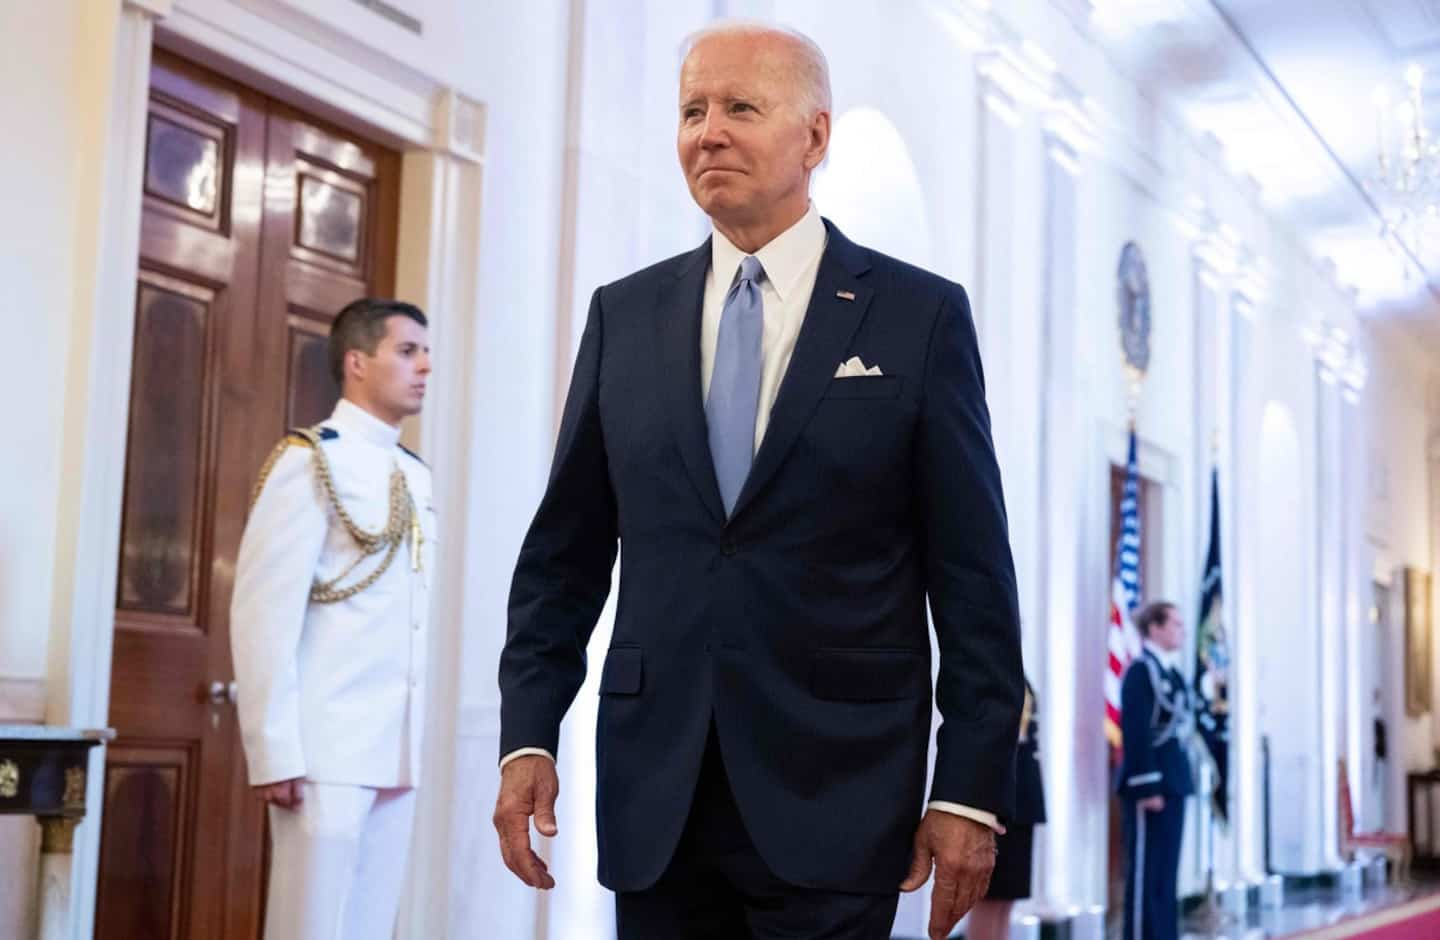 Will Biden succeed in finishing his first term?